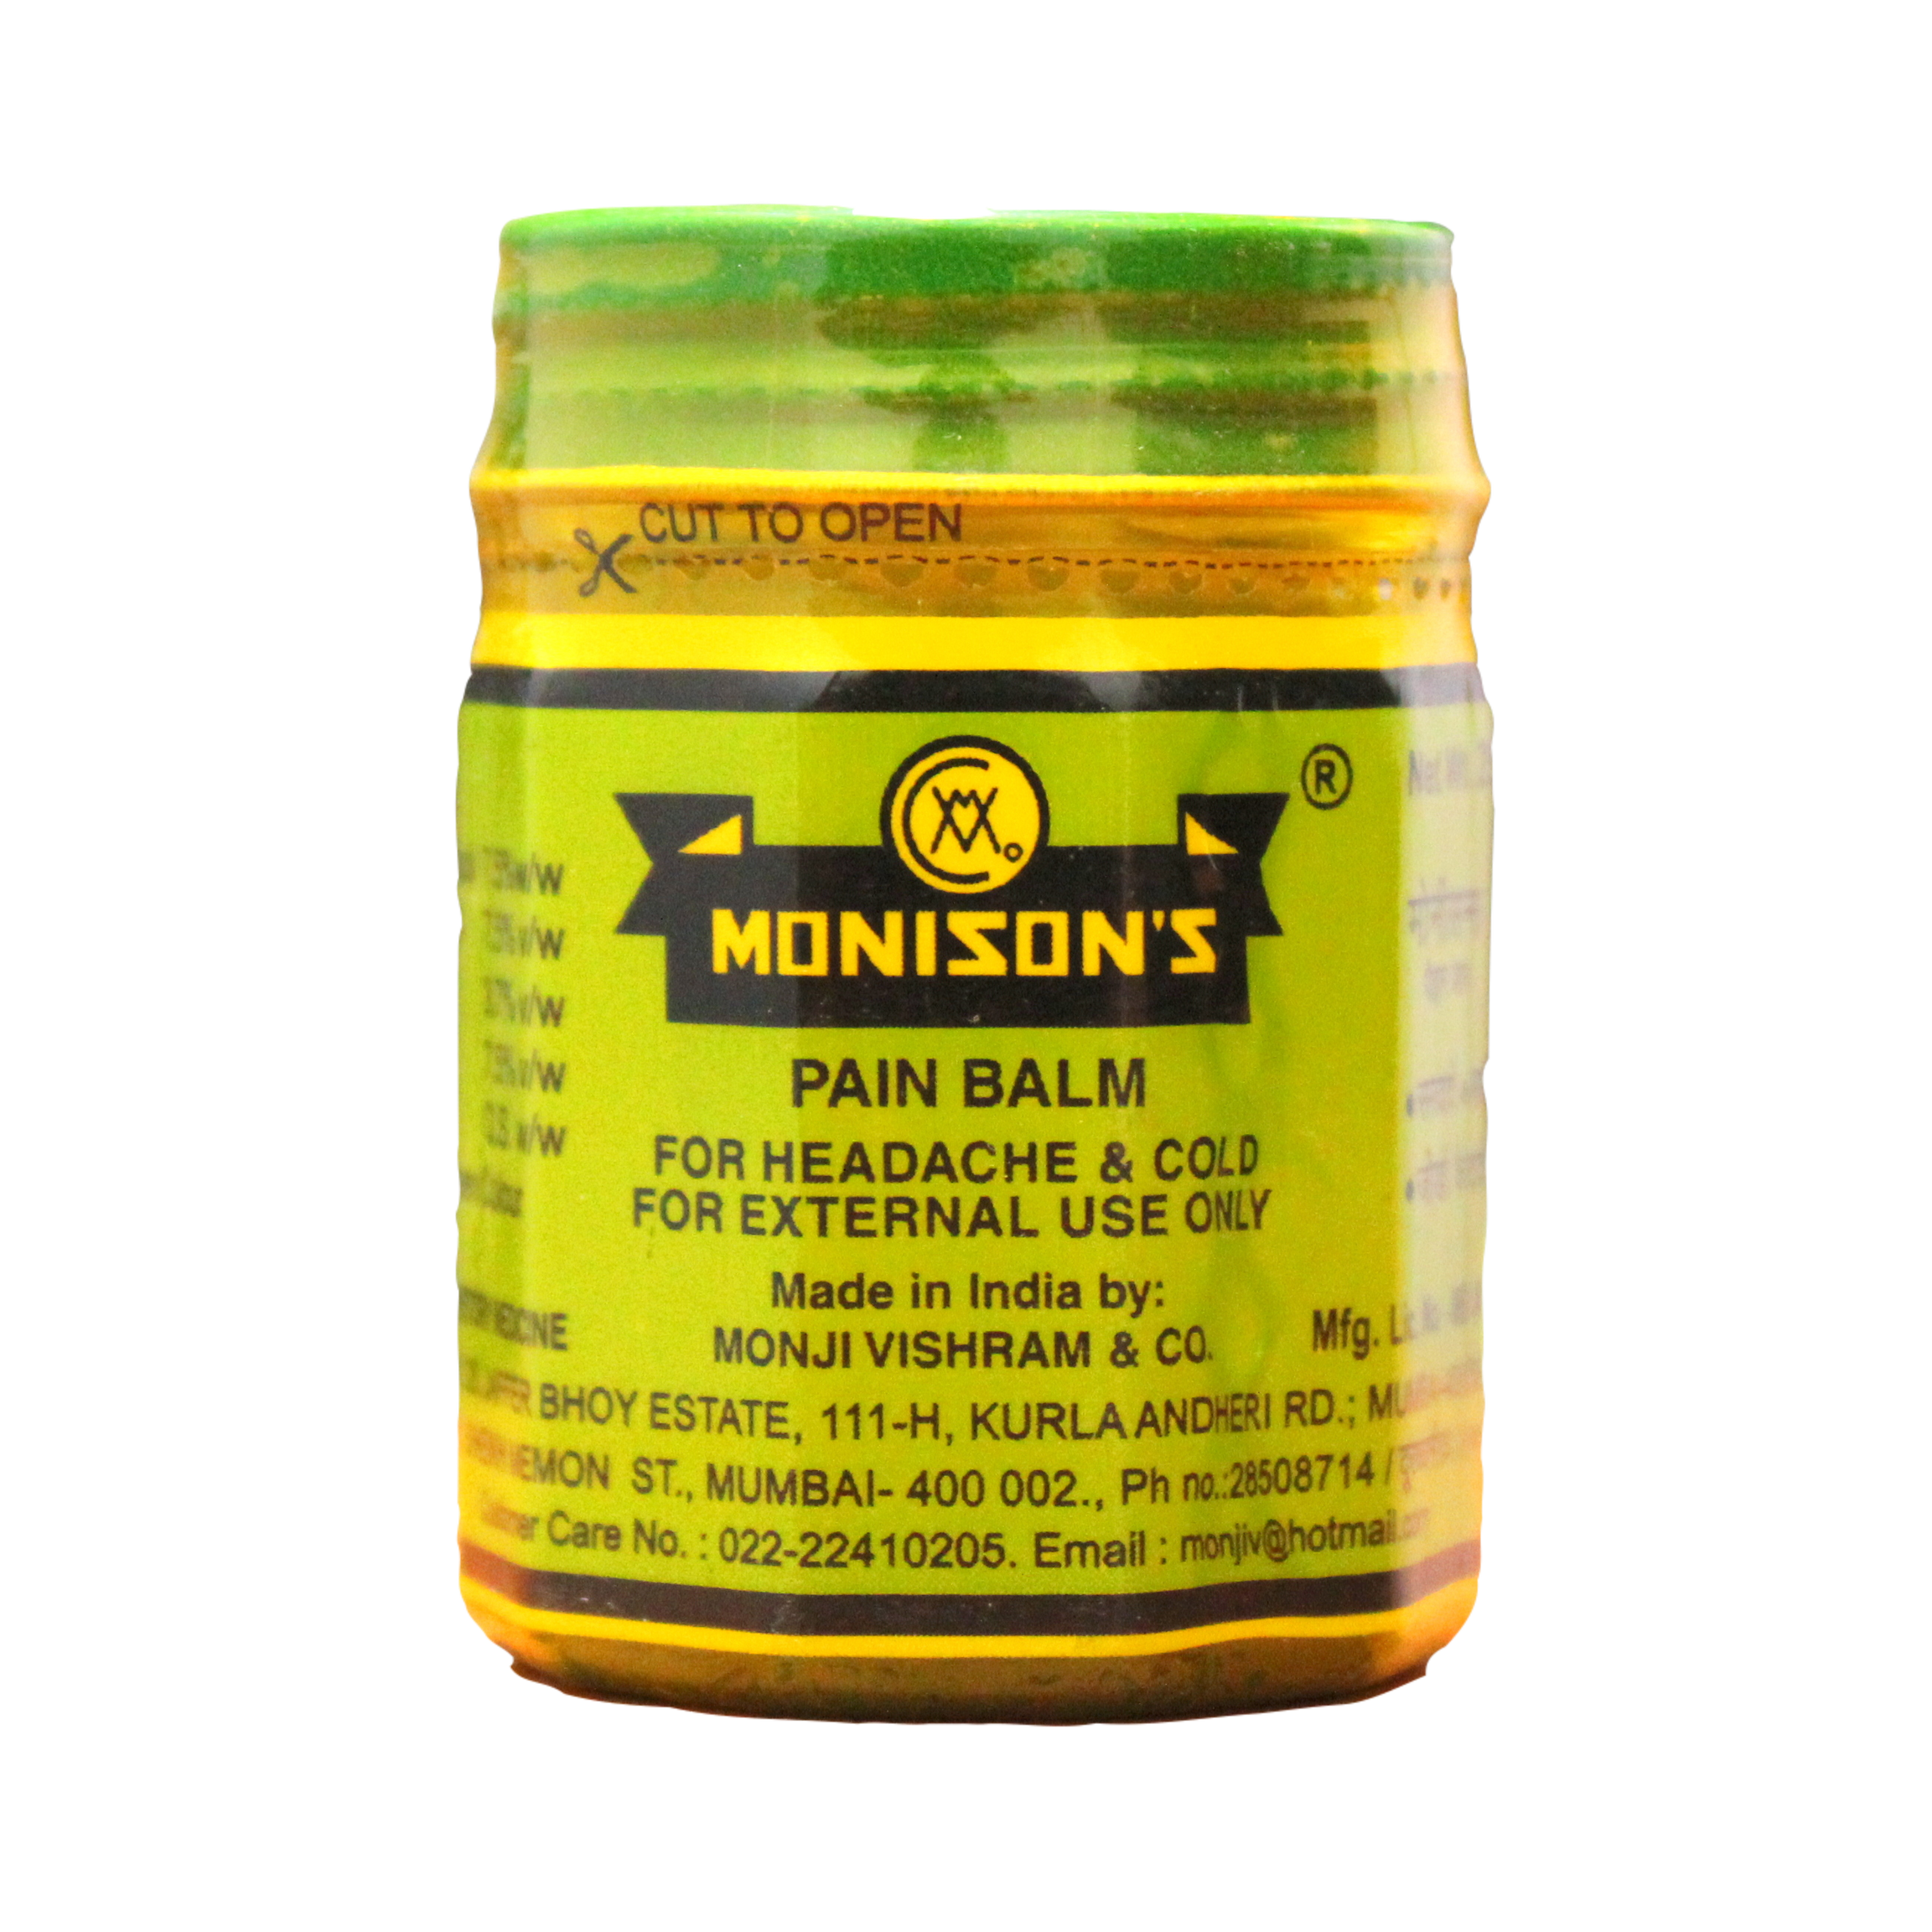 Shop Monison pain balm 45gm at price 72.00 from Monison Online - Ayush Care